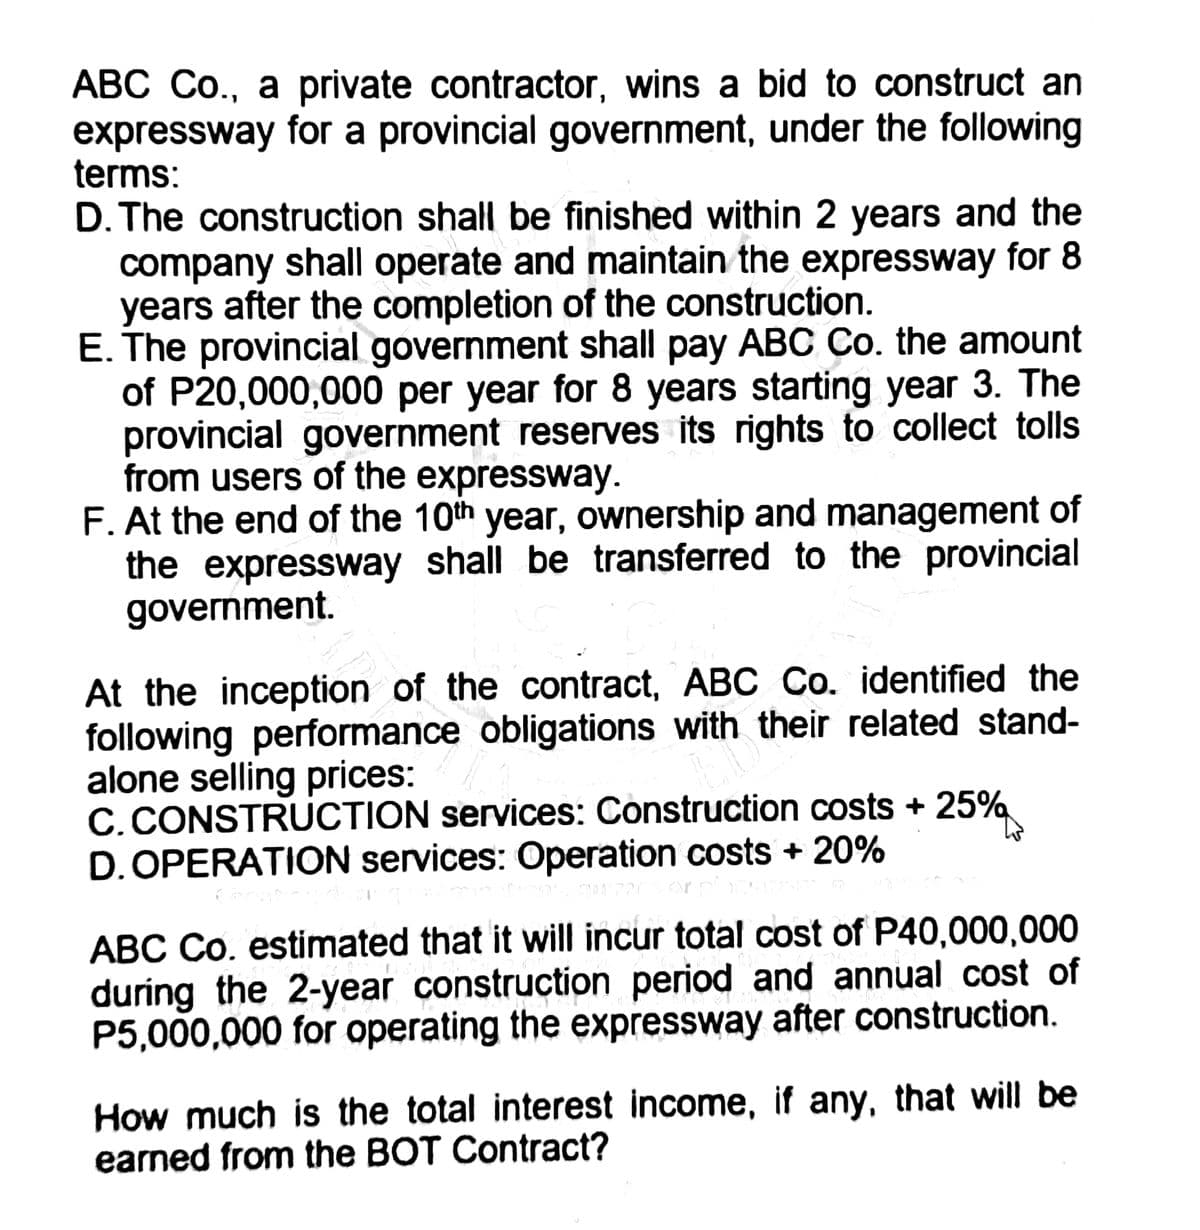 ABC Co., a private contractor, wins a bid to construct an
expressway for a provincial government, under the following
terms:
D. The construction shall be finished within 2 years and the
company shall operate and maintain the expressway for 8
years after the completion of the construction.
E. The provincial government shall pay ABC Co. the amount
of P20,000,000 per year for 8 years starting year 3. The
provincial government reserves its rights to collect tolls
from users of the expressway.
F. At the end of the 10th year, ownership and management of
the expressway shall be transferred to the provincial
government.
At the inception of the contract, ABC Co. identified the
following performance obligations with their related stand-
alone selling prices:
C. CONSTRUCTION services: Construction costs + 25%
D. OPERATION services: Operation costs + 20%
Mont
ABC Co. estimated that it will incur total cost of P40,000,000
during the 2-year construction period and annual cost of
P5,000,000 for operating the expressway after construction.
How much is the total interest income, if any, that will be
earned from the BOT Contract?